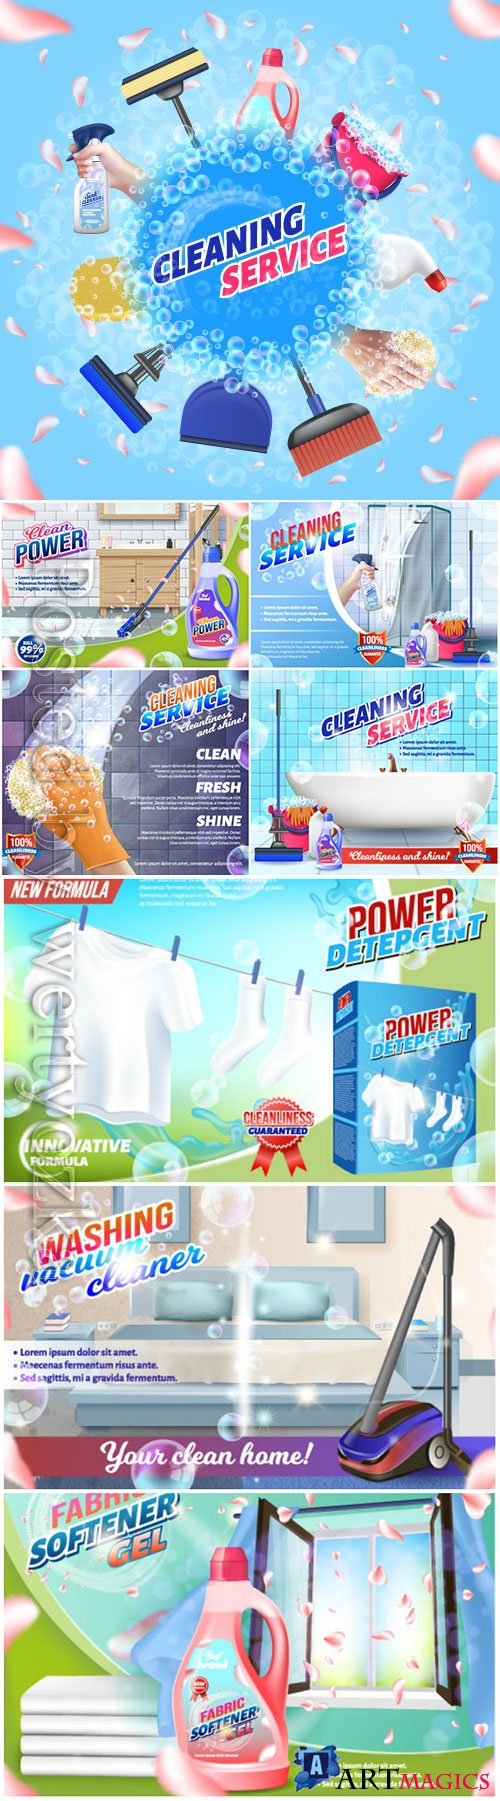 Cleaning service vector background